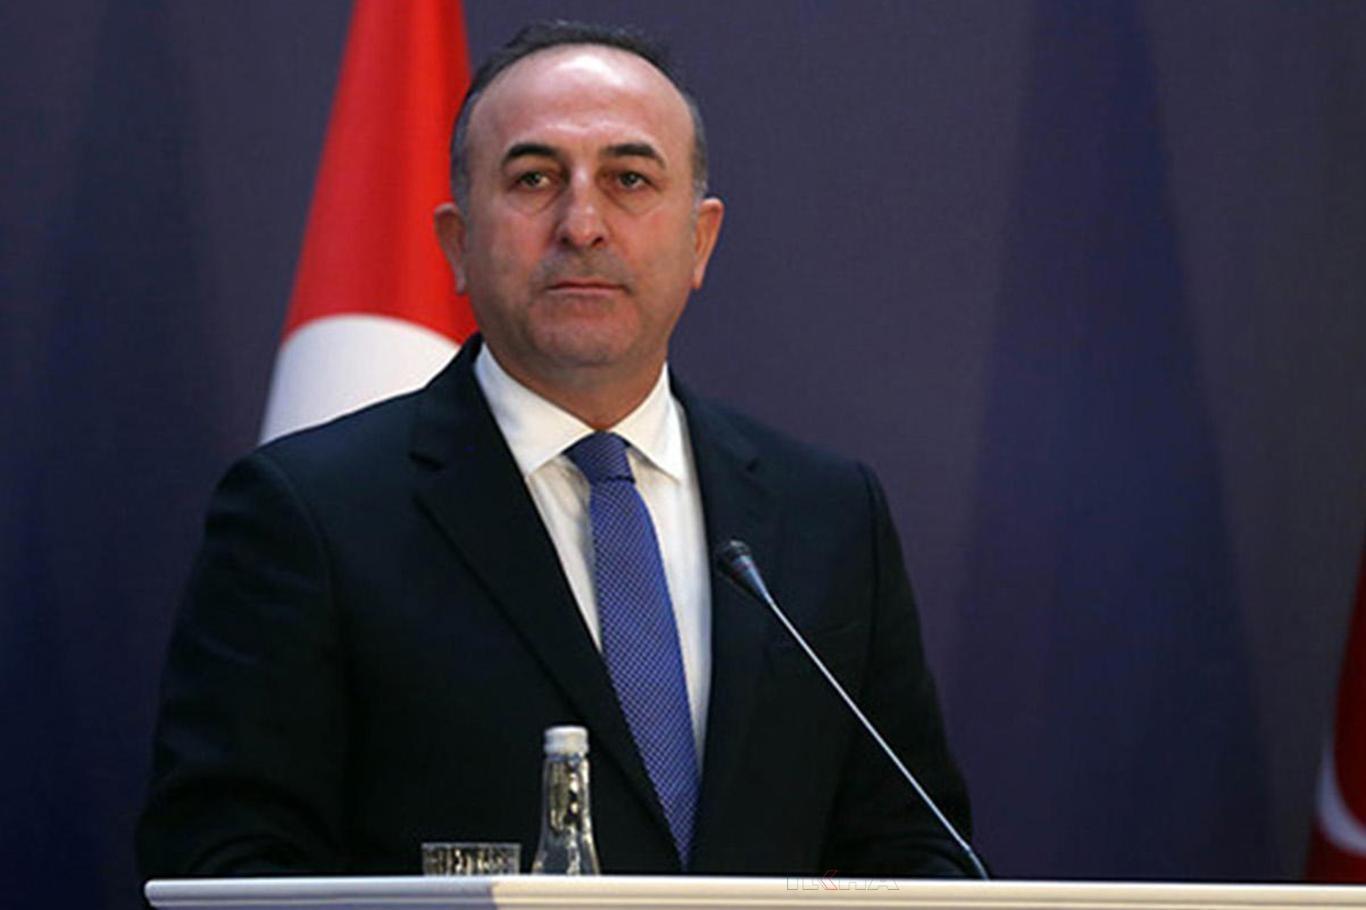 Turkey did and will do its part for a cease-fire and peace in Libya: Çavuşoğlu